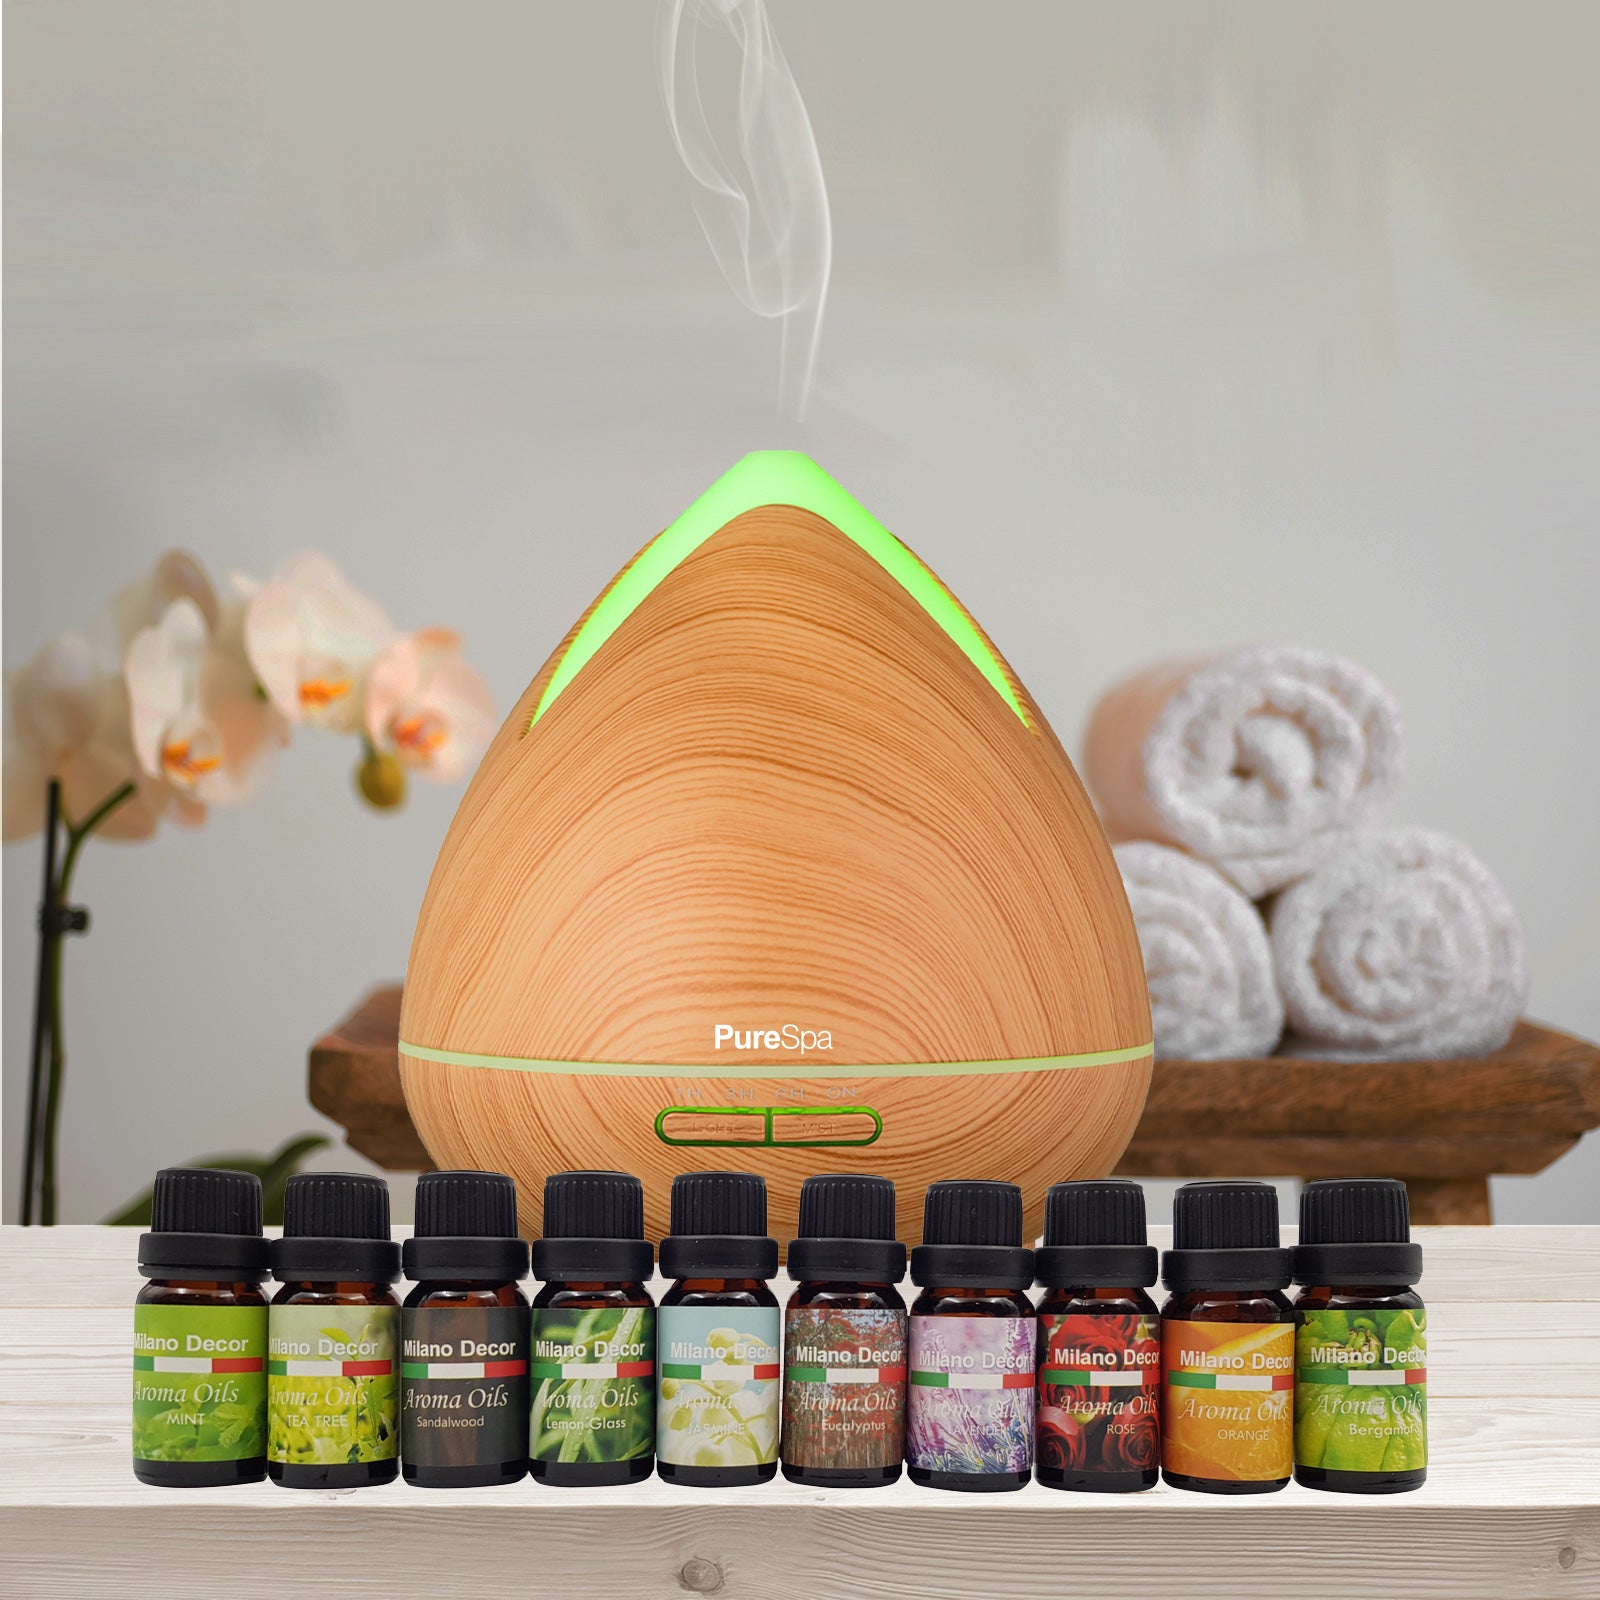 Purespa Diffuser Set With 10 Pack Oils Humidifier Aromatherapy Light Wood - AULASH